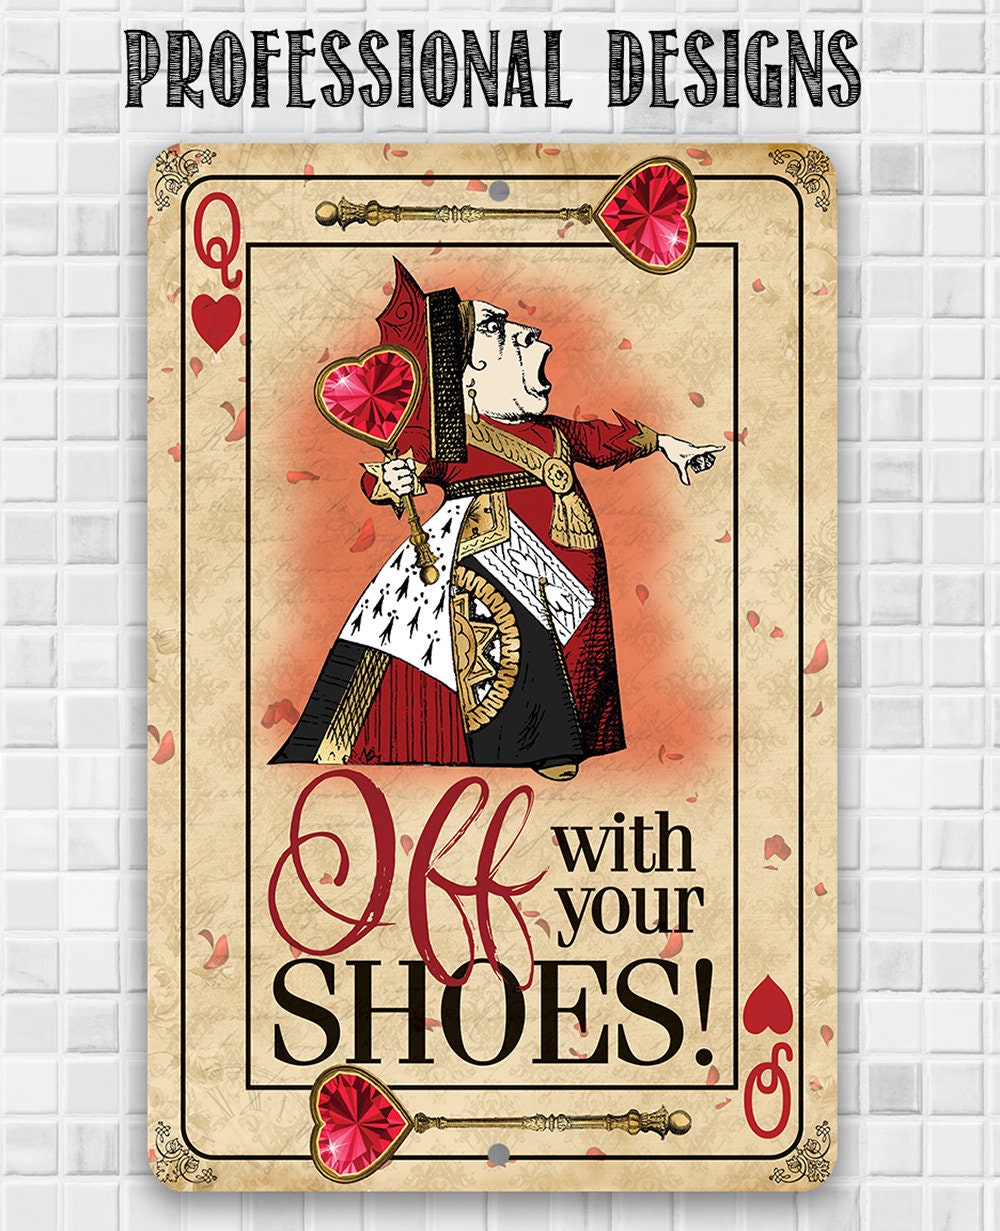 Off With Your Shoes Alice Queen of Hearts - 8" x 12" or 12" x 18" Aluminum Tin Awesome Metal Poster Lone Star Art 